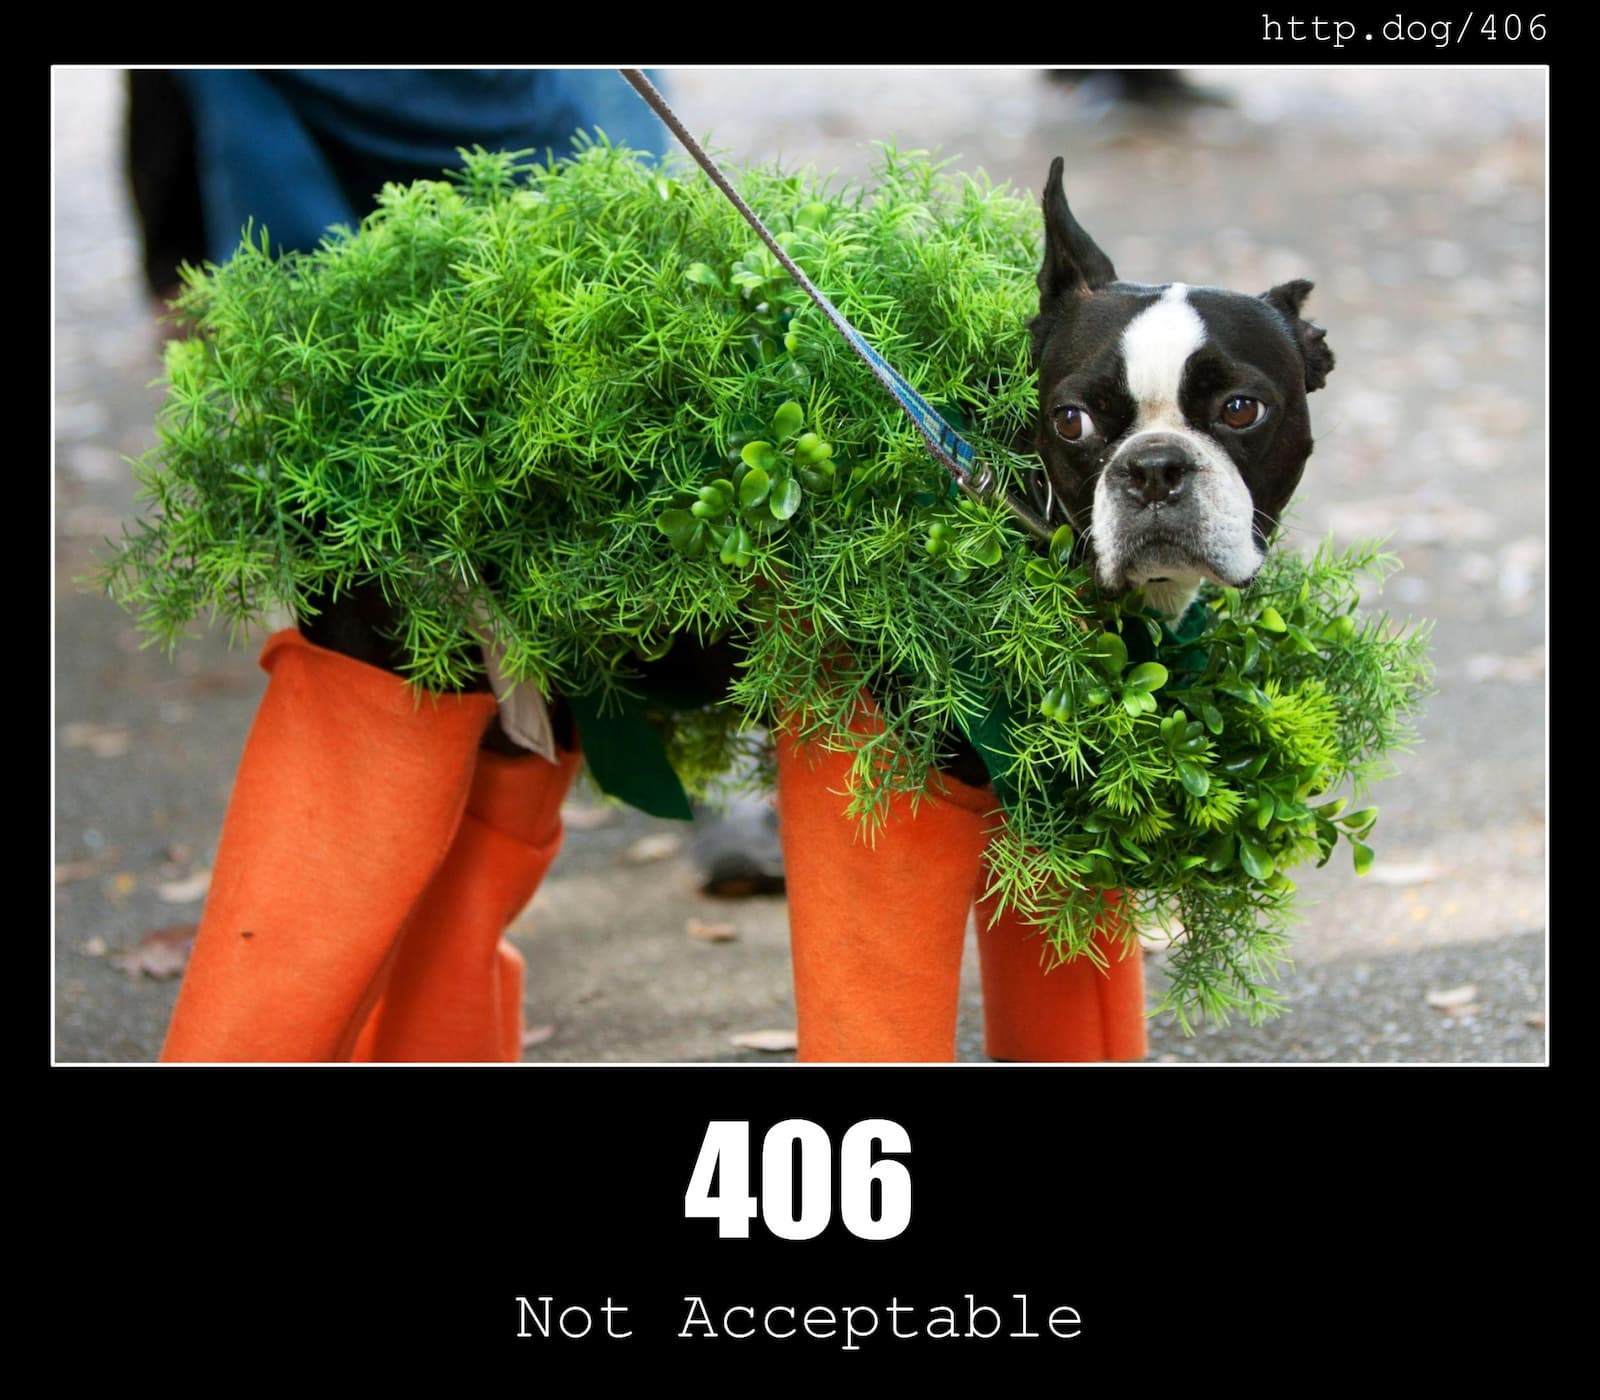 HTTP Status Code 406 Not Acceptable & Dogs